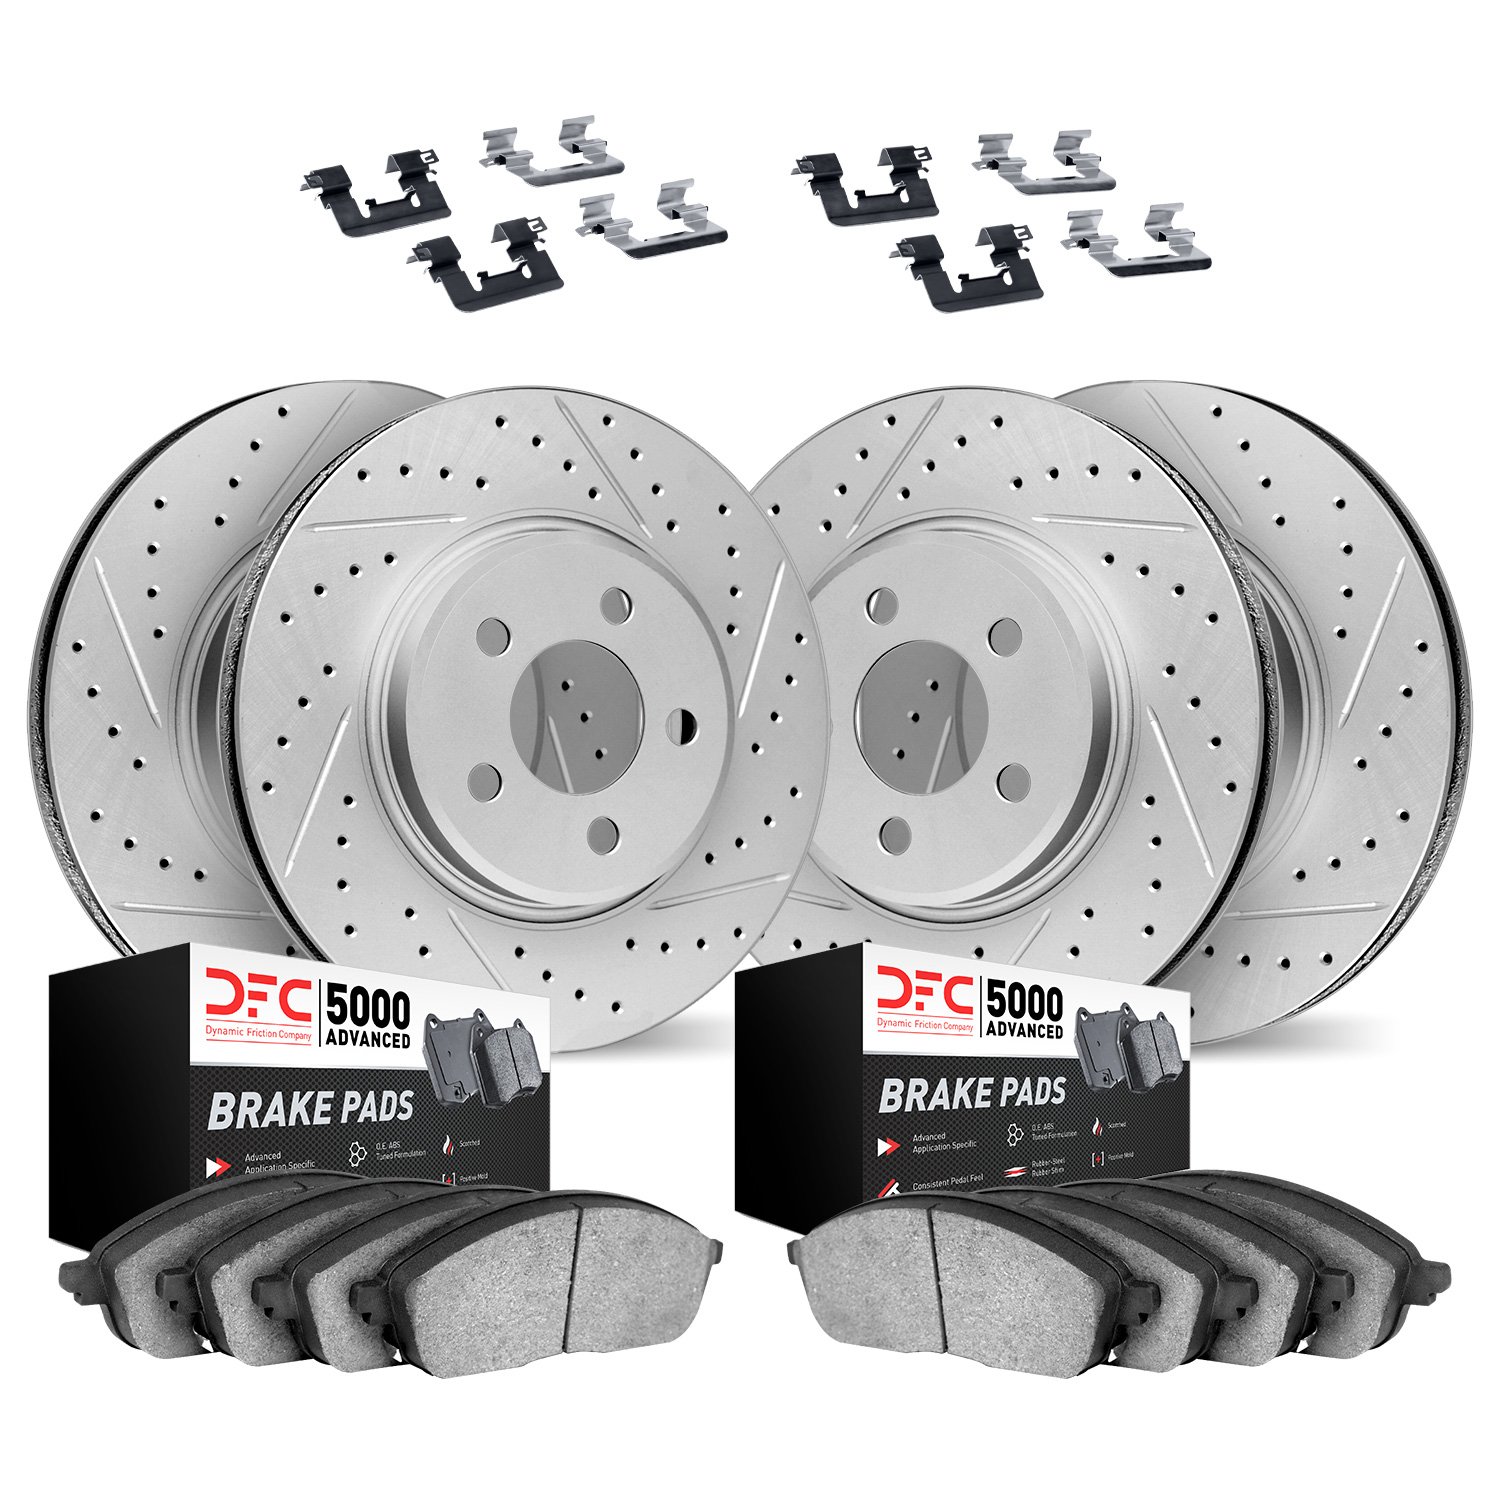 2514-63001 Geoperformance Drilled/Slotted Rotors w/5000 Advanced Brake Pads Kit & Hardware, 2019-2019 Mercedes-Benz, Position: F